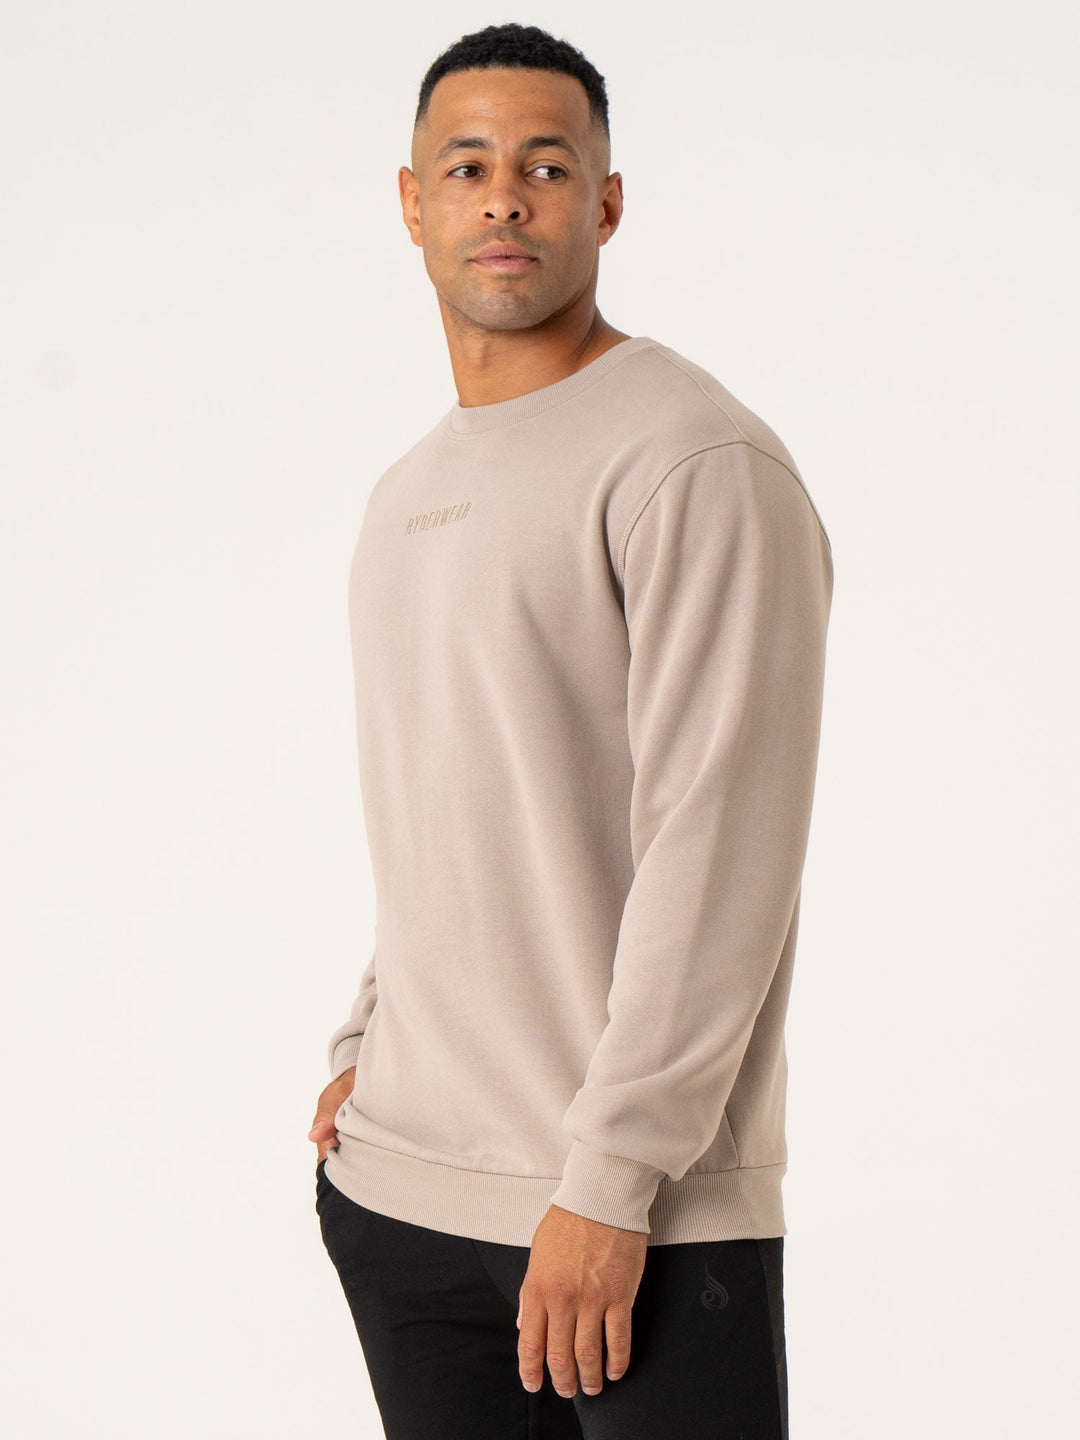 Pursuit Pullover - Taupe Clothing Ryderwear 